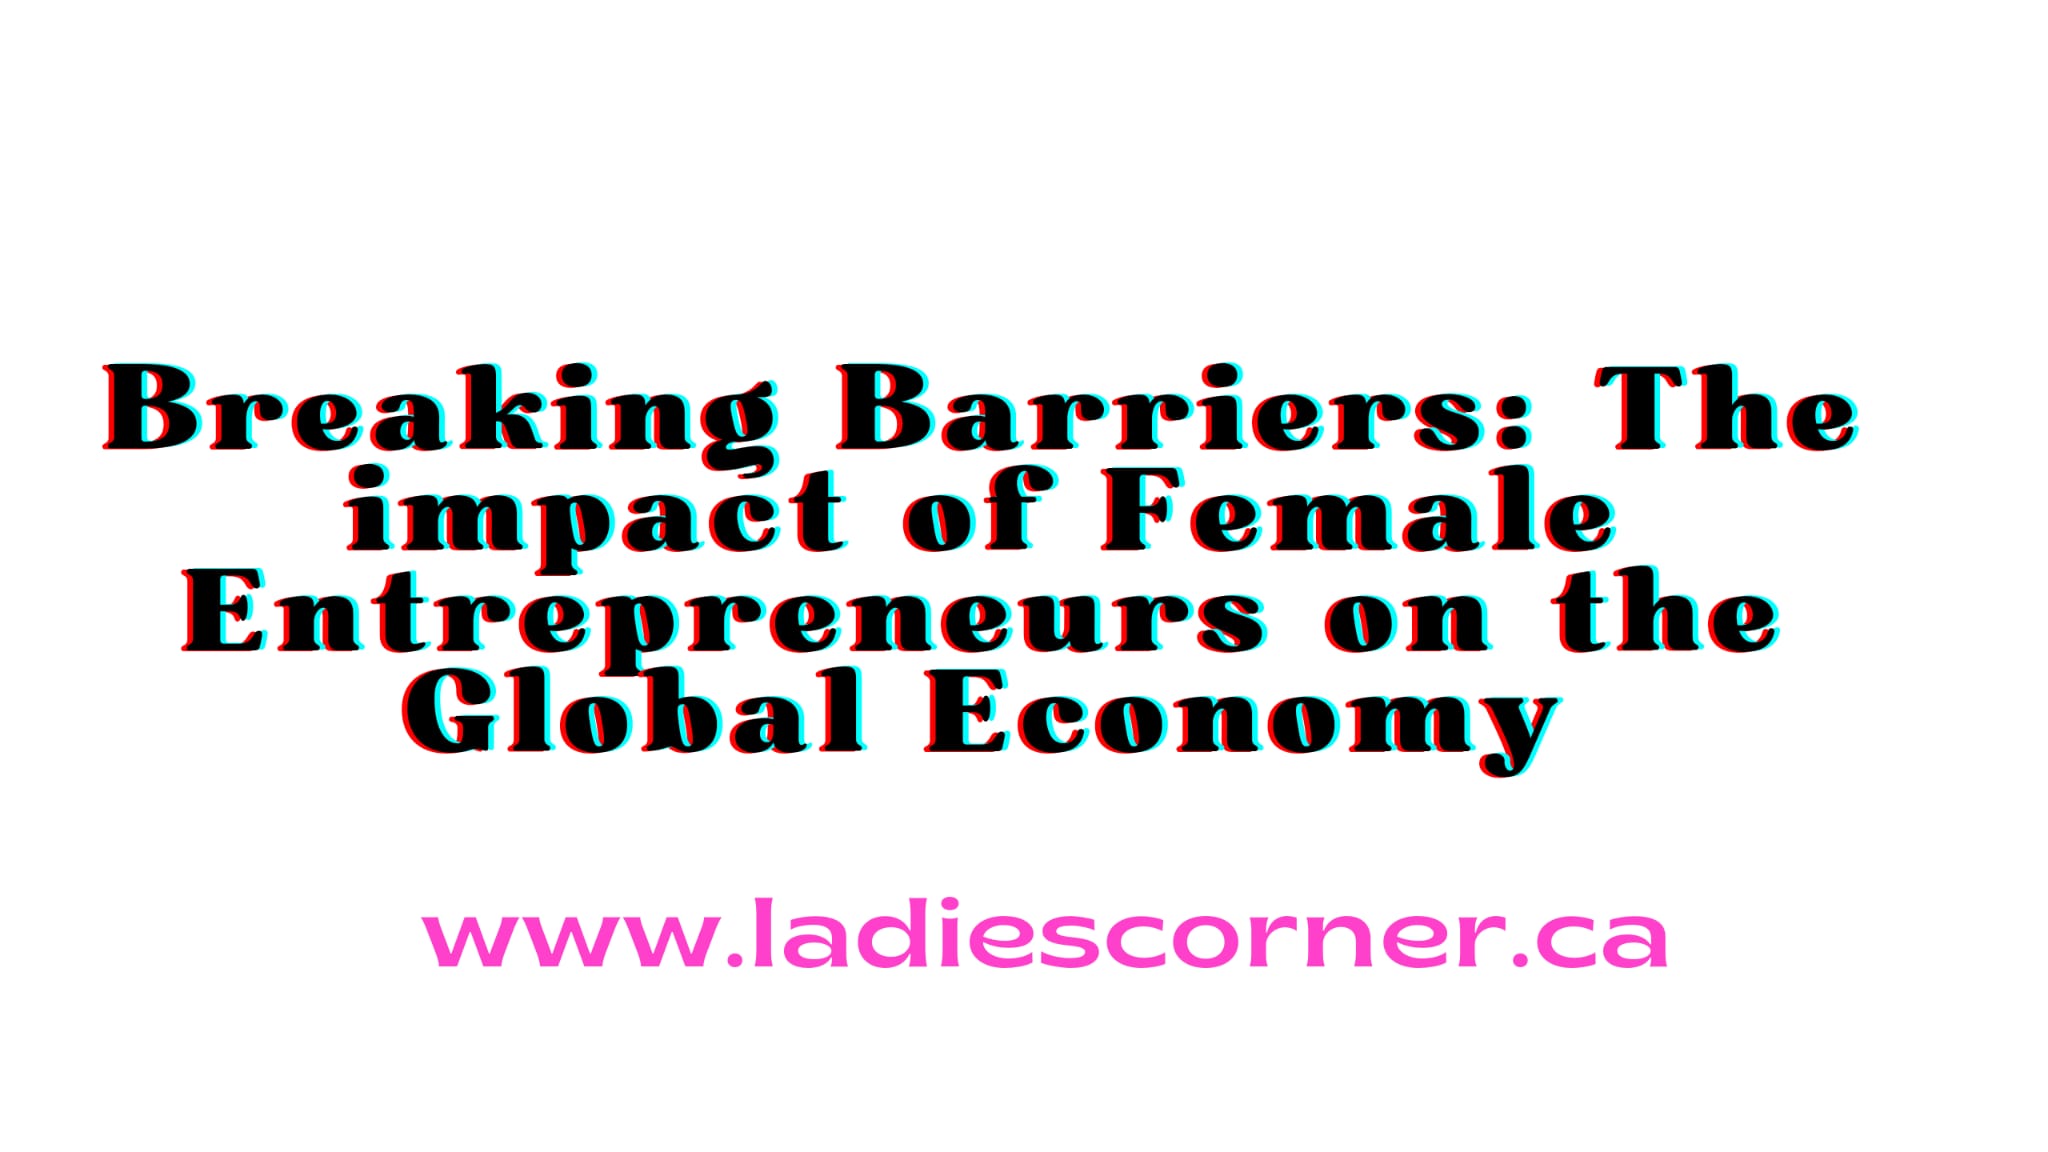 Breaking Barriers: The Impact of Female Entrepreneurs on the Global Economy